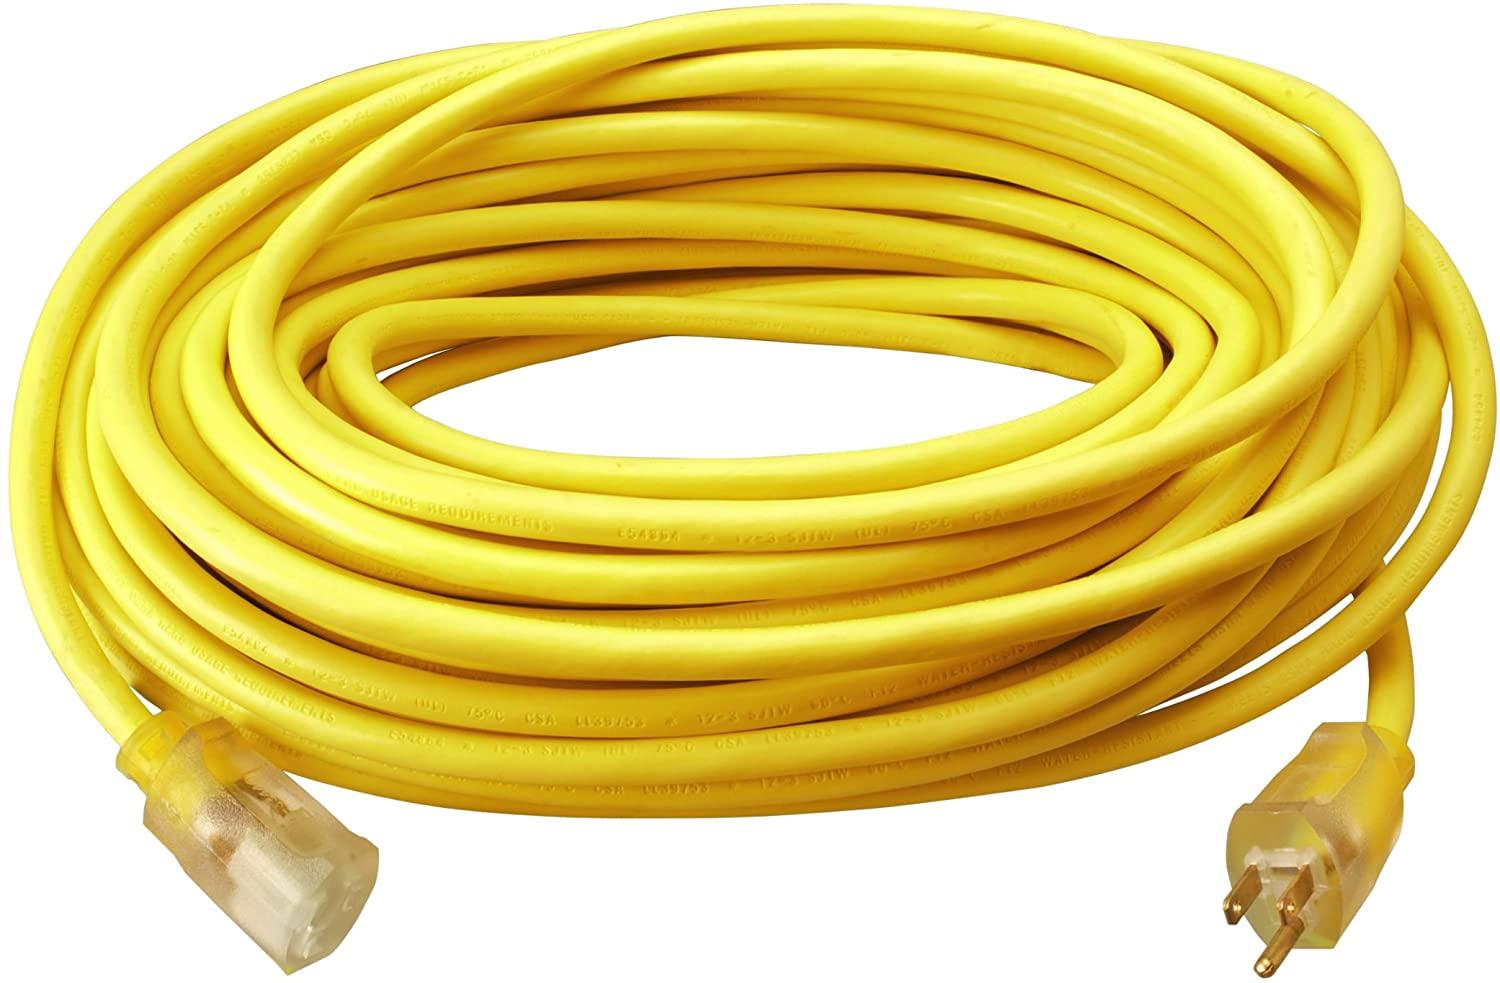 50ft Southwire Outdoor Extension Power Cord for $26.48 Shipped